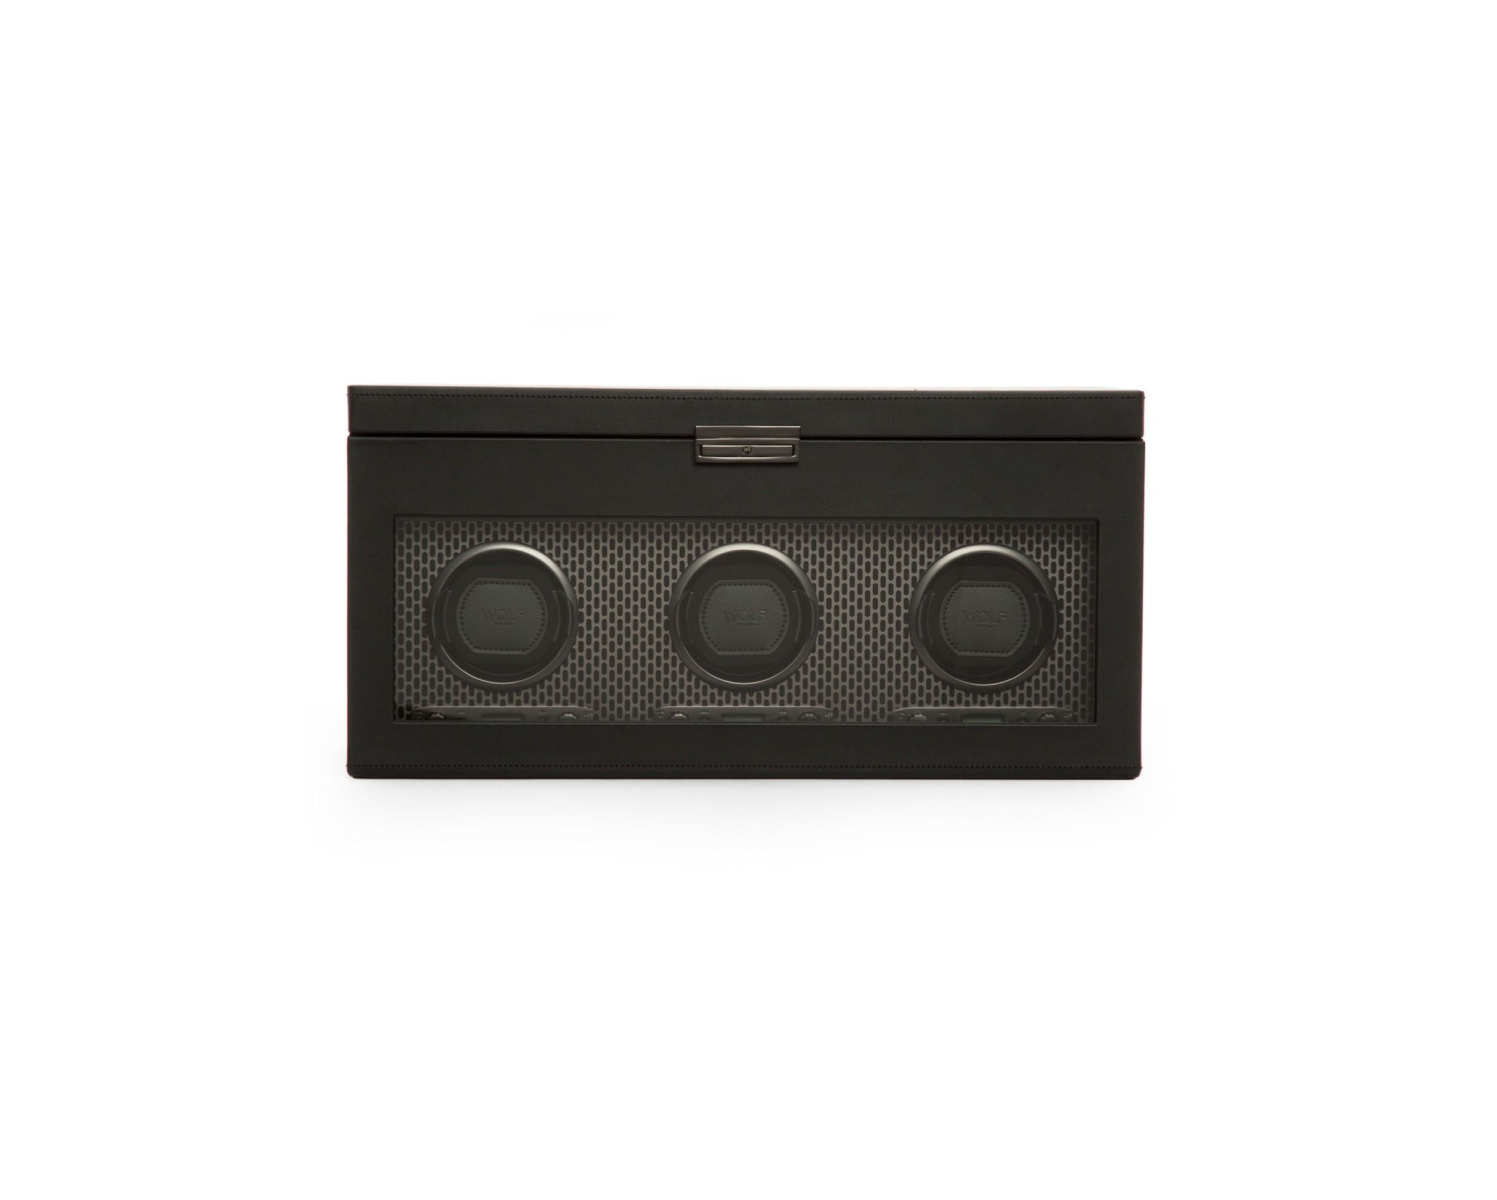 Axis Triple Watch Winder With Storage